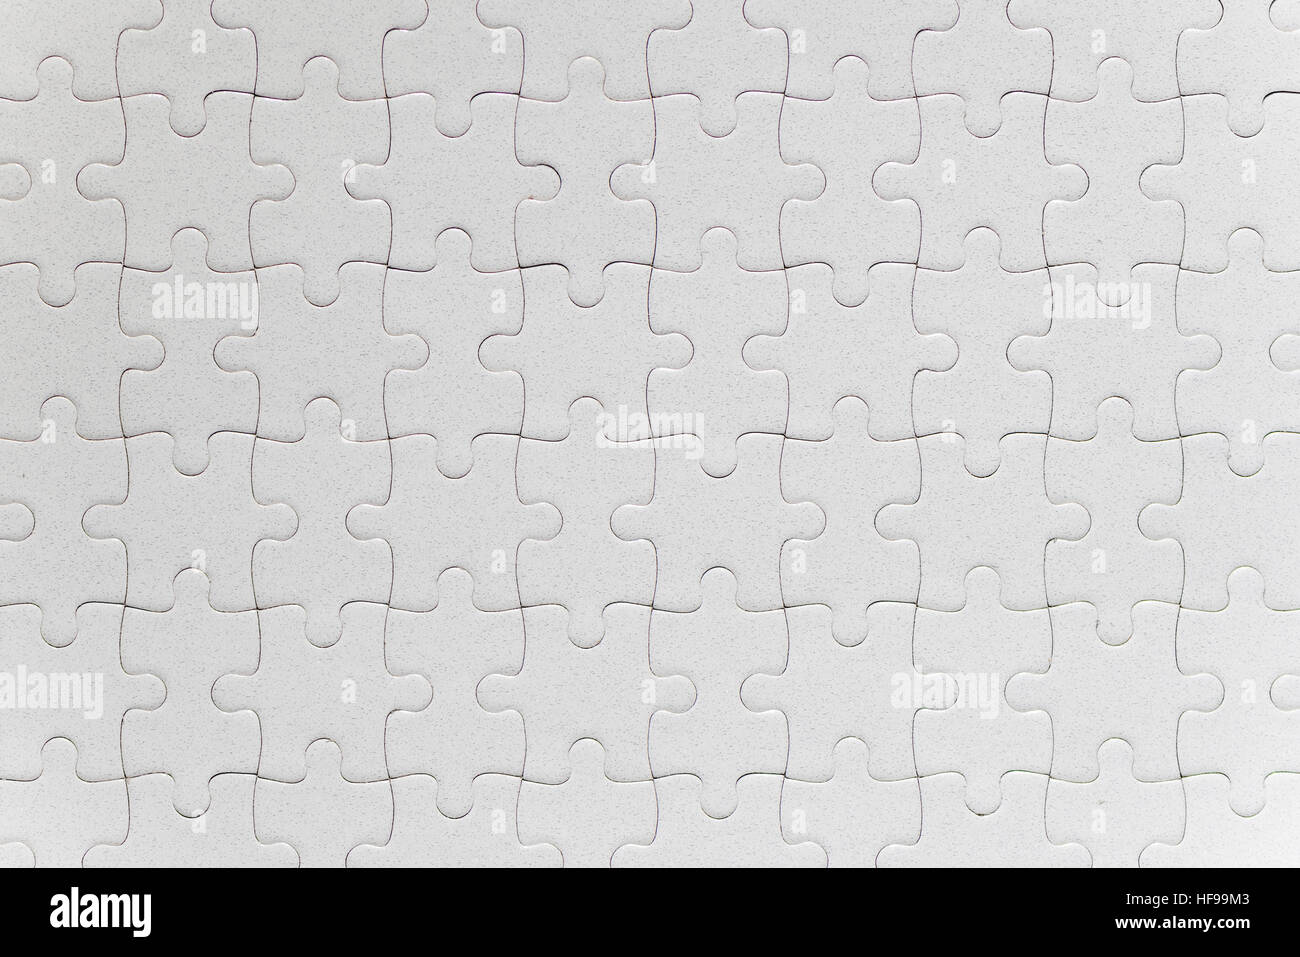 Blank white jigsaw puzzle pieces completed as copy space Stock Photo